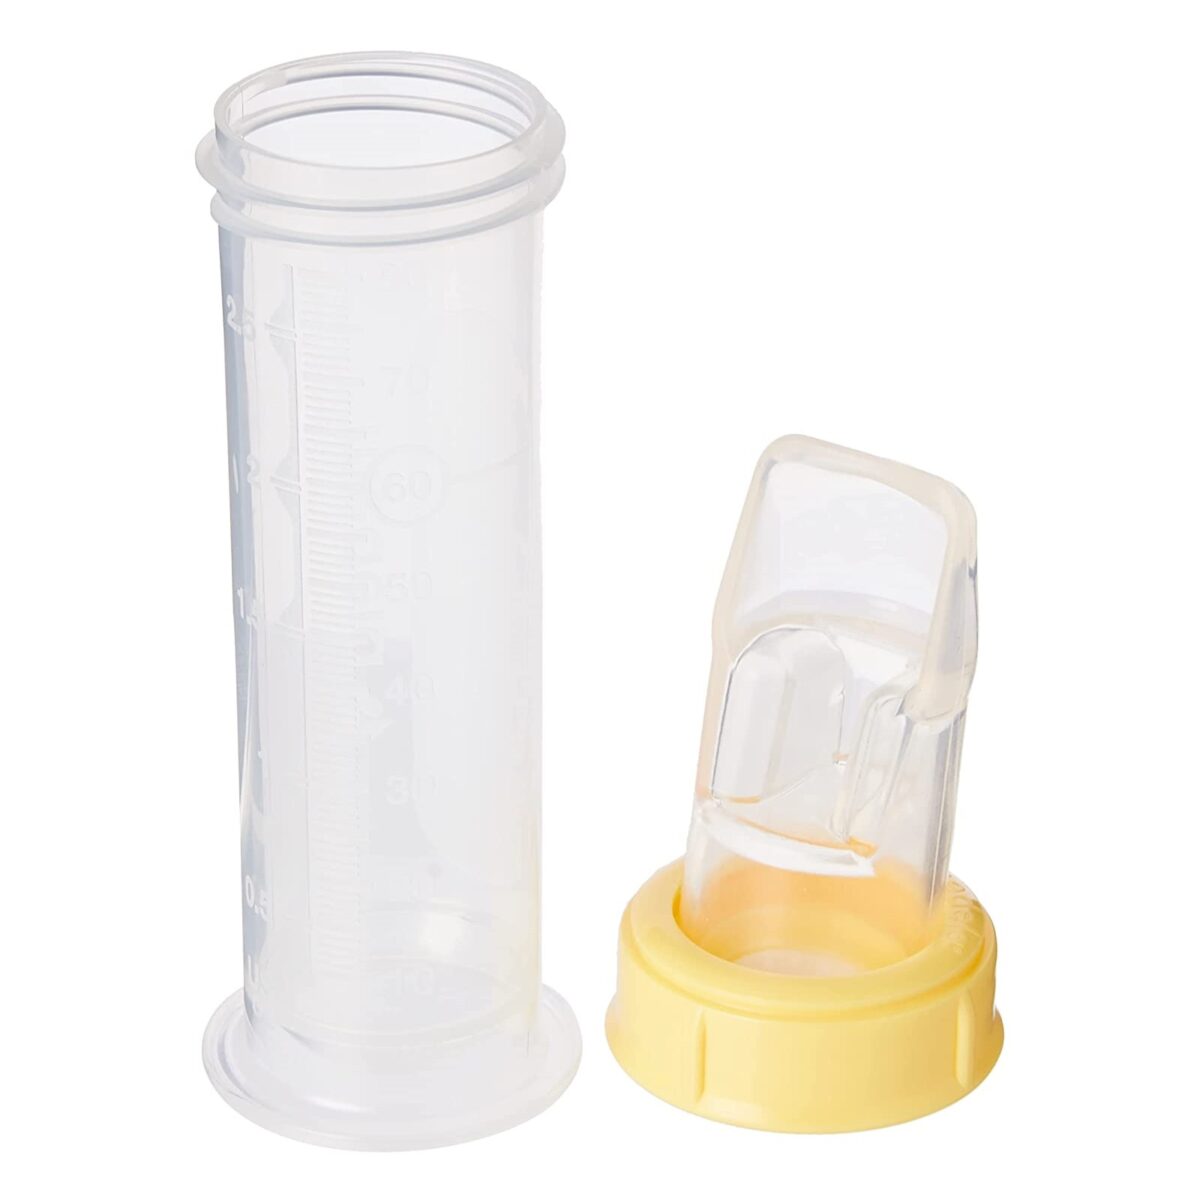 medela-softcup-advanced-cup-feeder-%ce%b5%ce%b9%ce%b4%ce%b9%ce%ba%ce%ae-%cf%83%cf%85%cf%83%ce%ba%ce%b5%cf%85%ce%ae-%cf%83%ce%af%cf%84%ce%b9%cf%83%ce%b7%cf%82-80ml-mamaspharmacy-2